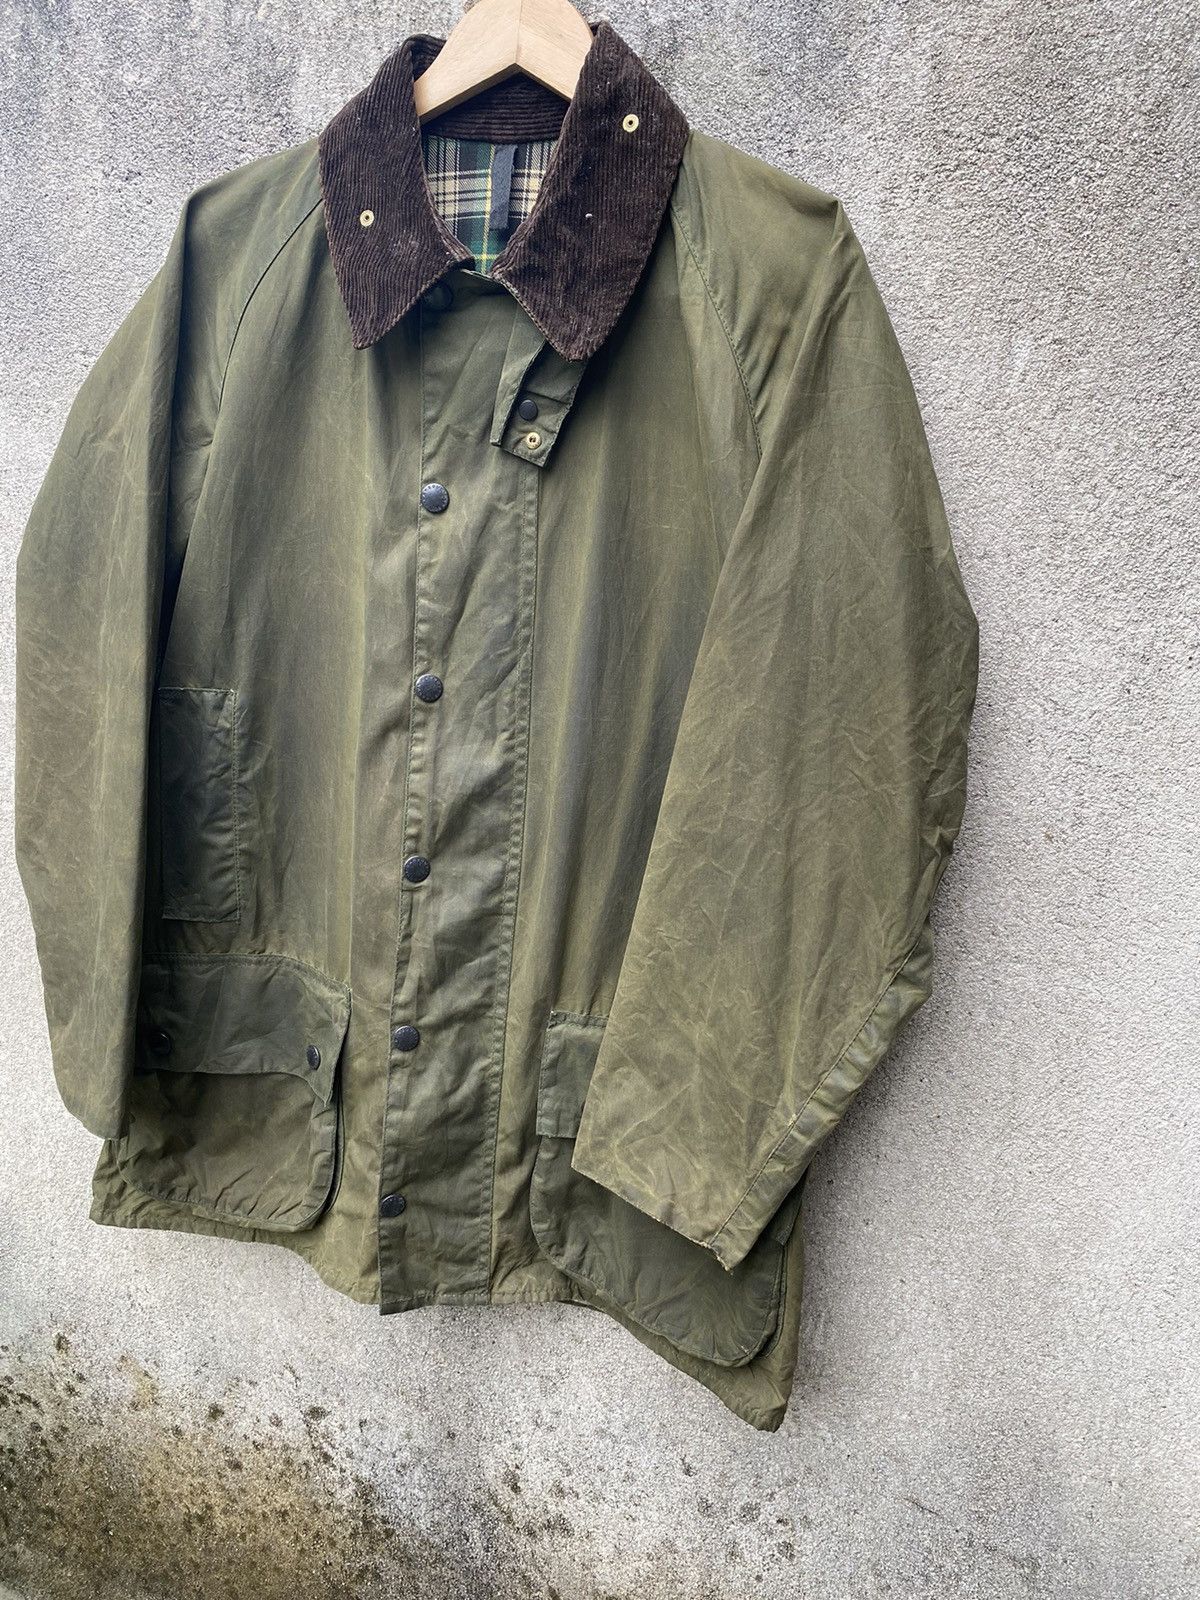 🏴󠁧󠁢󠁥󠁮󠁧󠁿 Barbour Beaufort Waxed Classic Jacket Made In England - 5